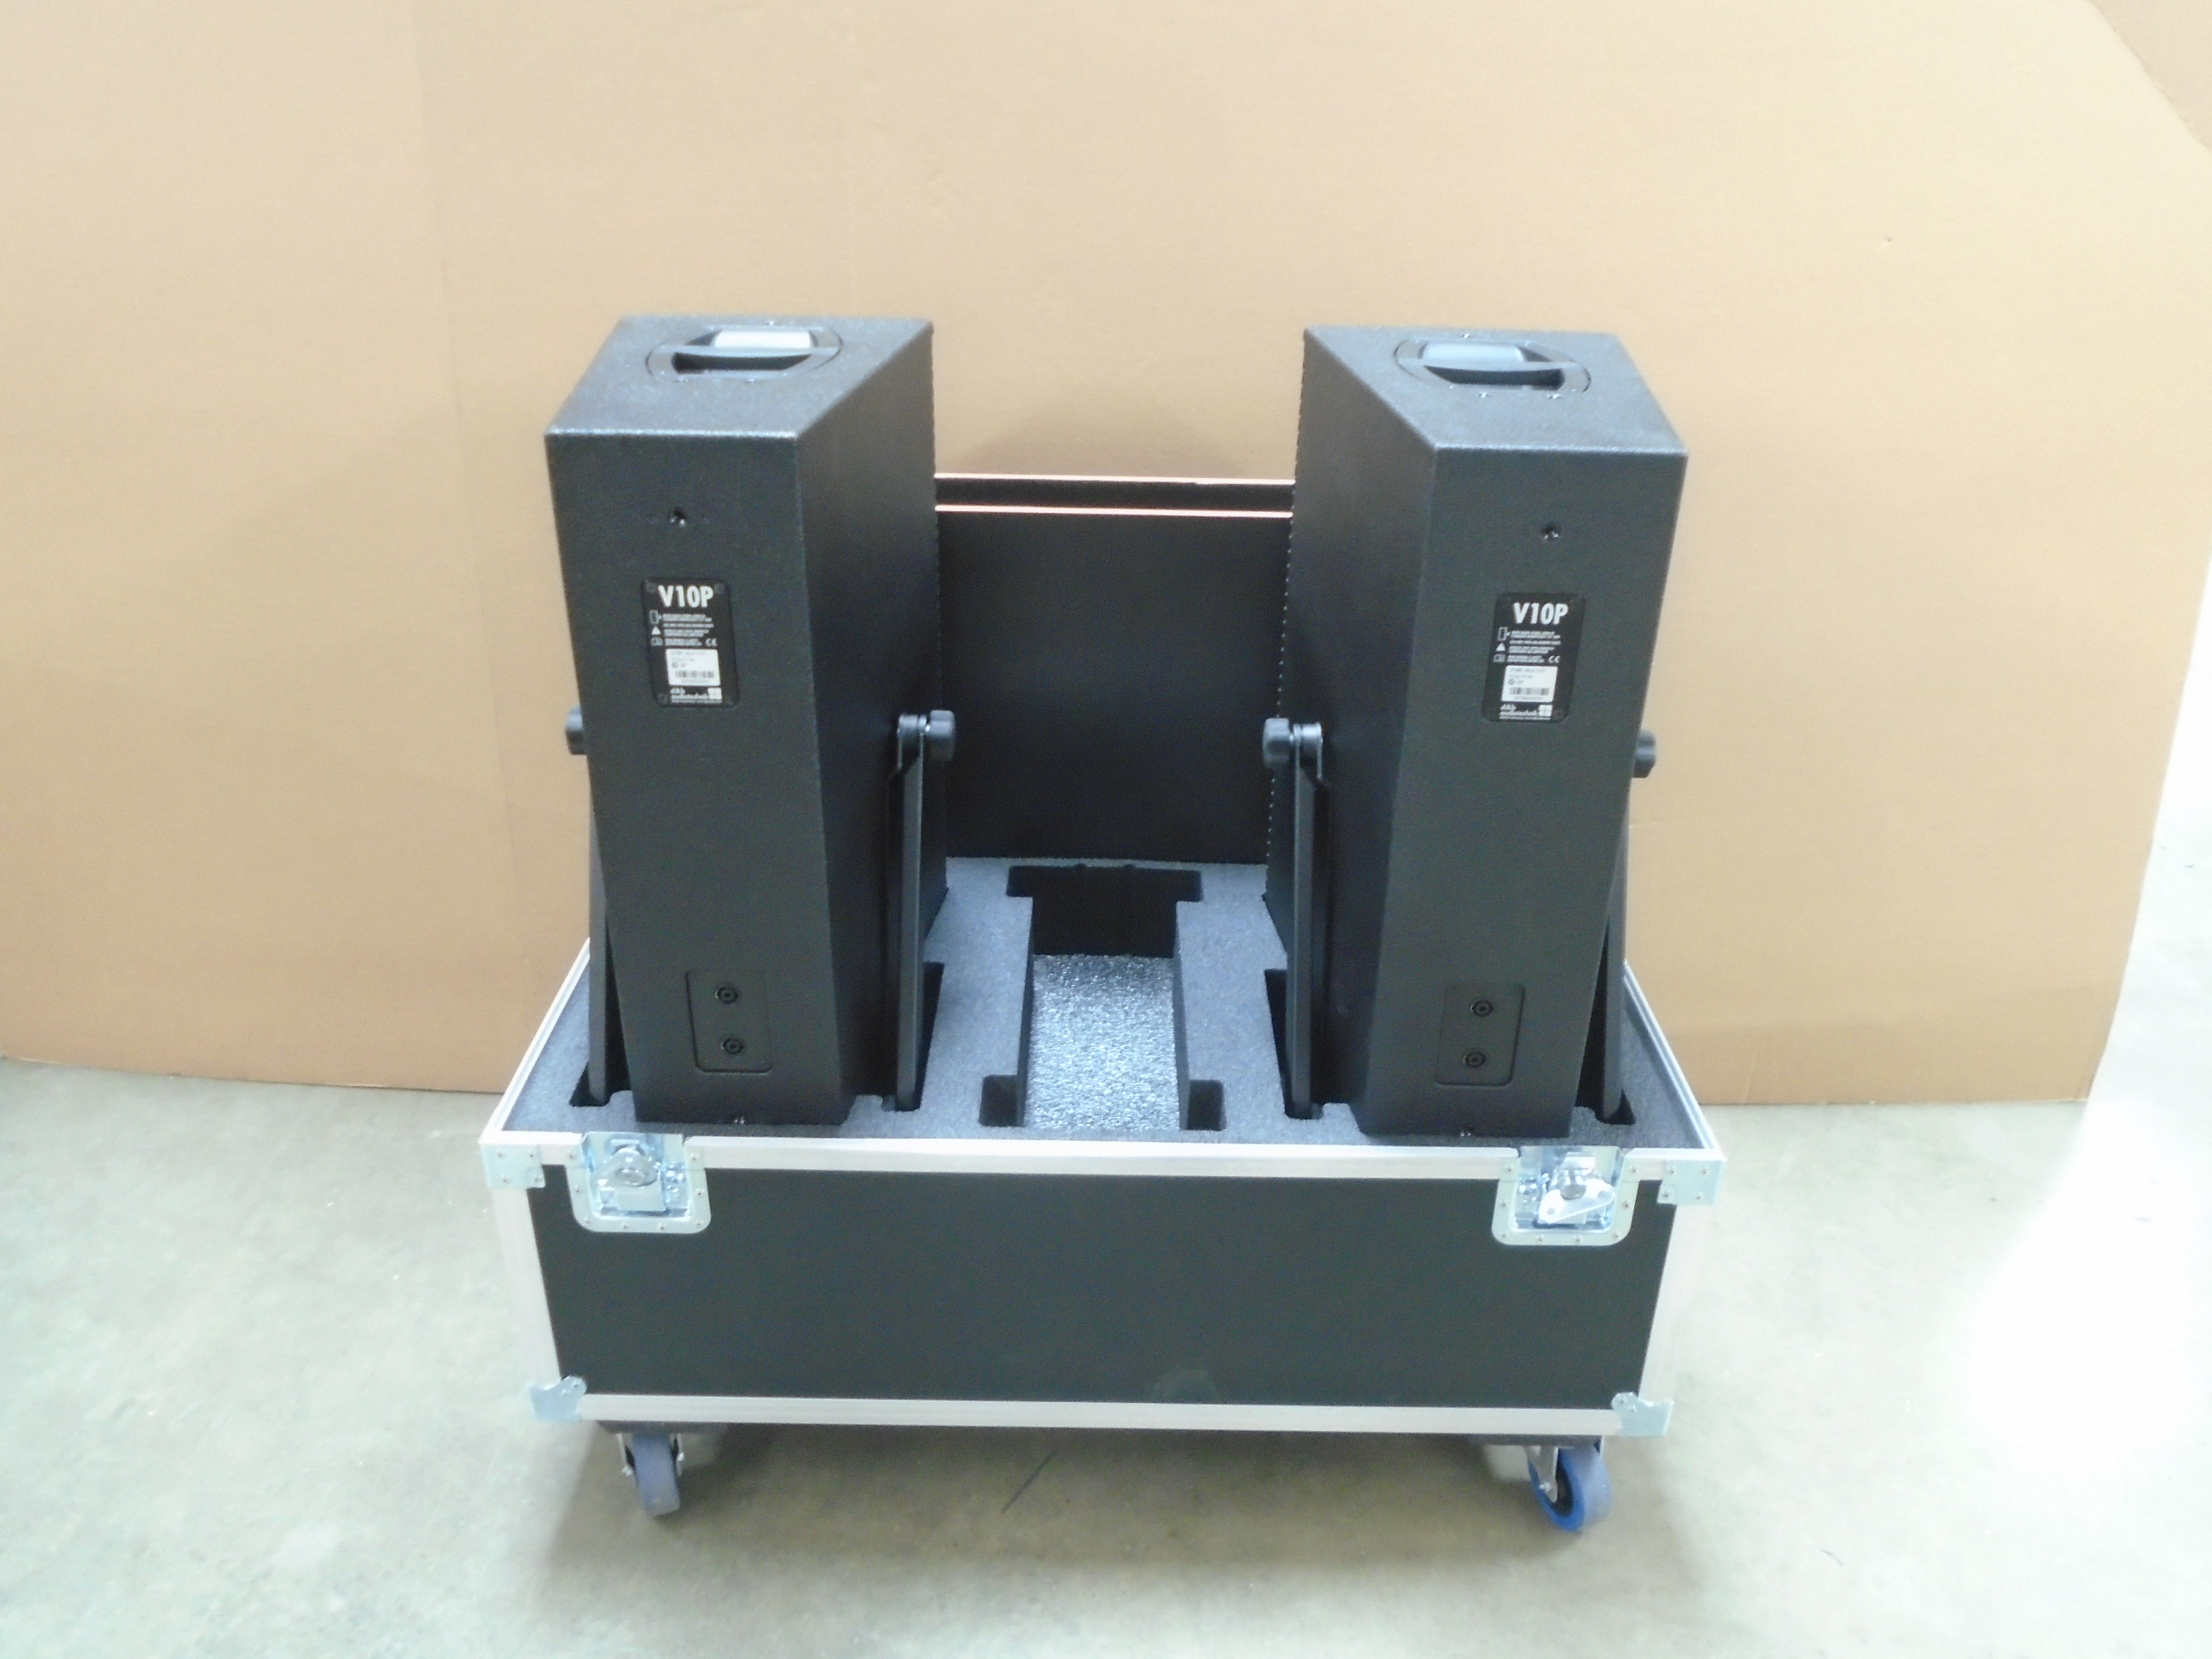 Print # 8938 - Custom Low Base Road Case for 2-Pack D&B Audiotechnik V10P Loudspeaker Kit which Includes 3-RU 26" Deep Rack Shell By Nelson Case Corp